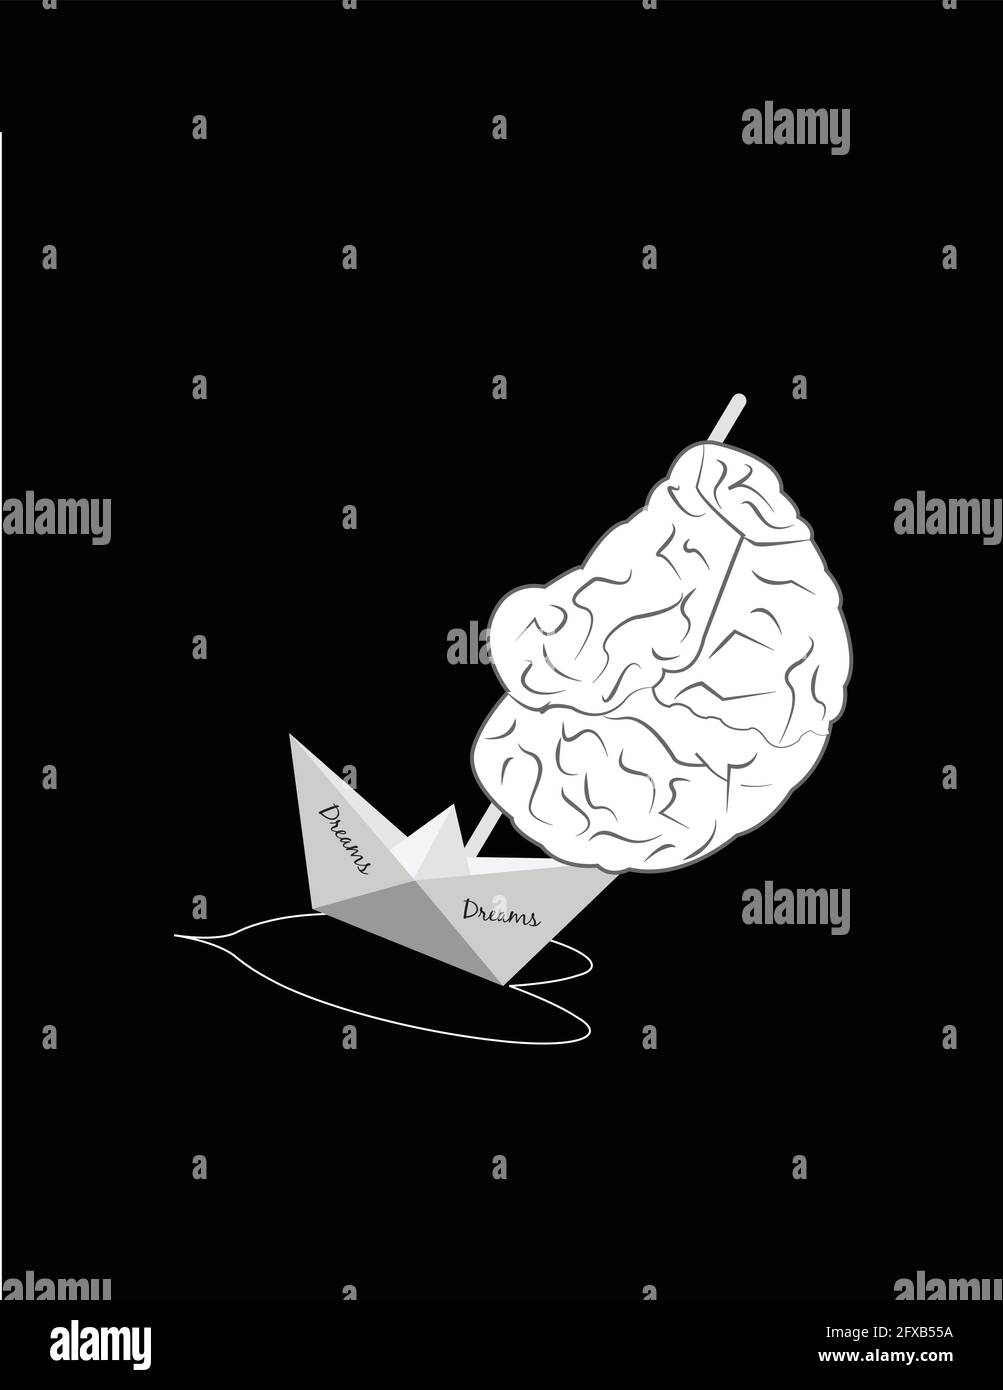 illustration of a boat with waves as heart and a brain to sail away during the night, isolated on a black background Stock Vector